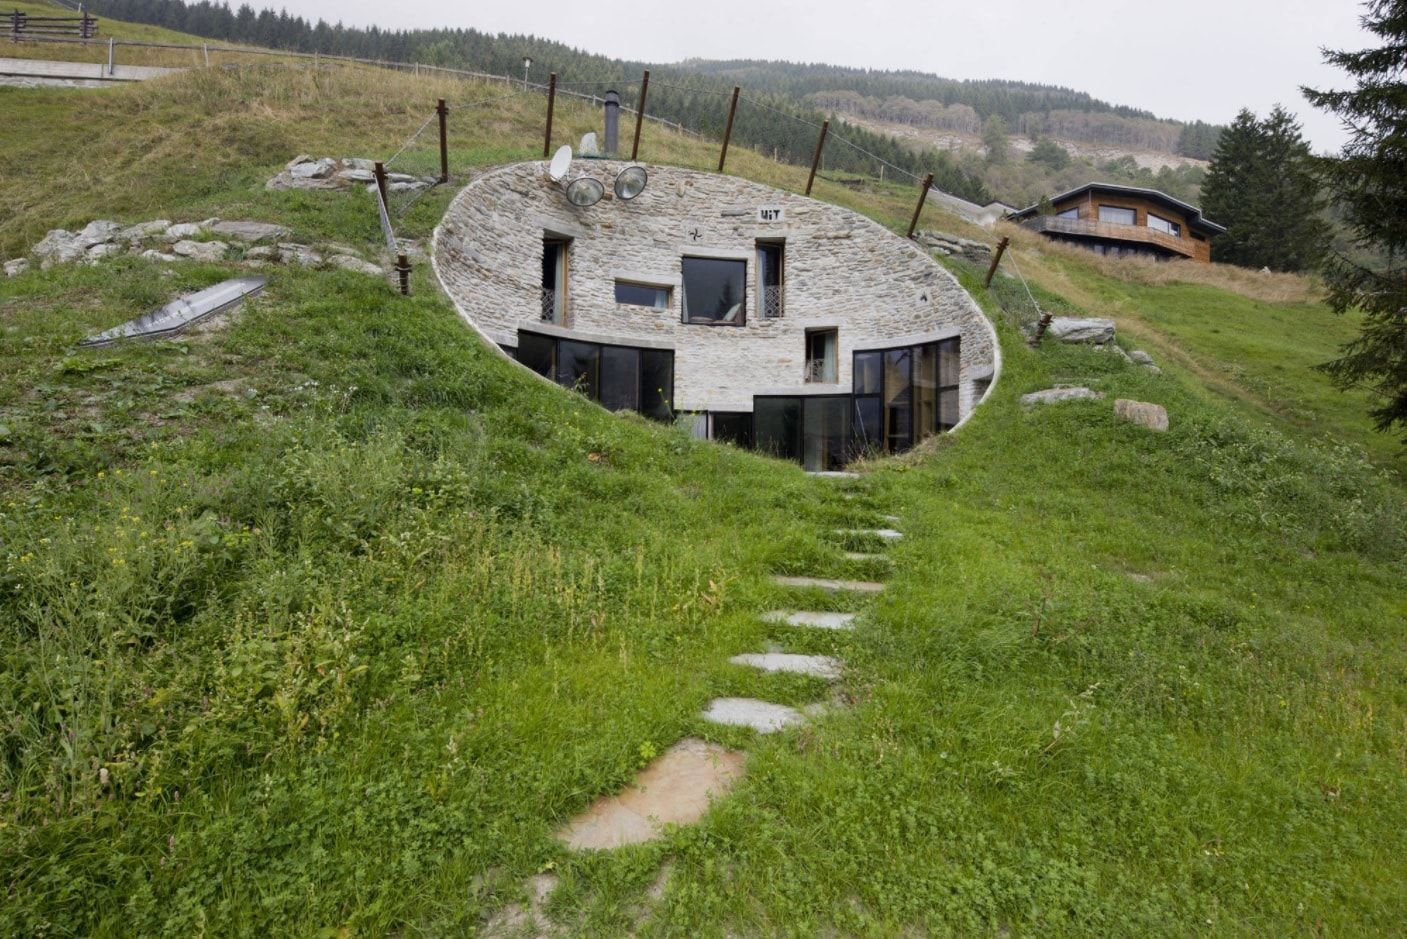 House Built Into Hill or Underground Houses. Unusual UFO alike stone decorated circle exterior